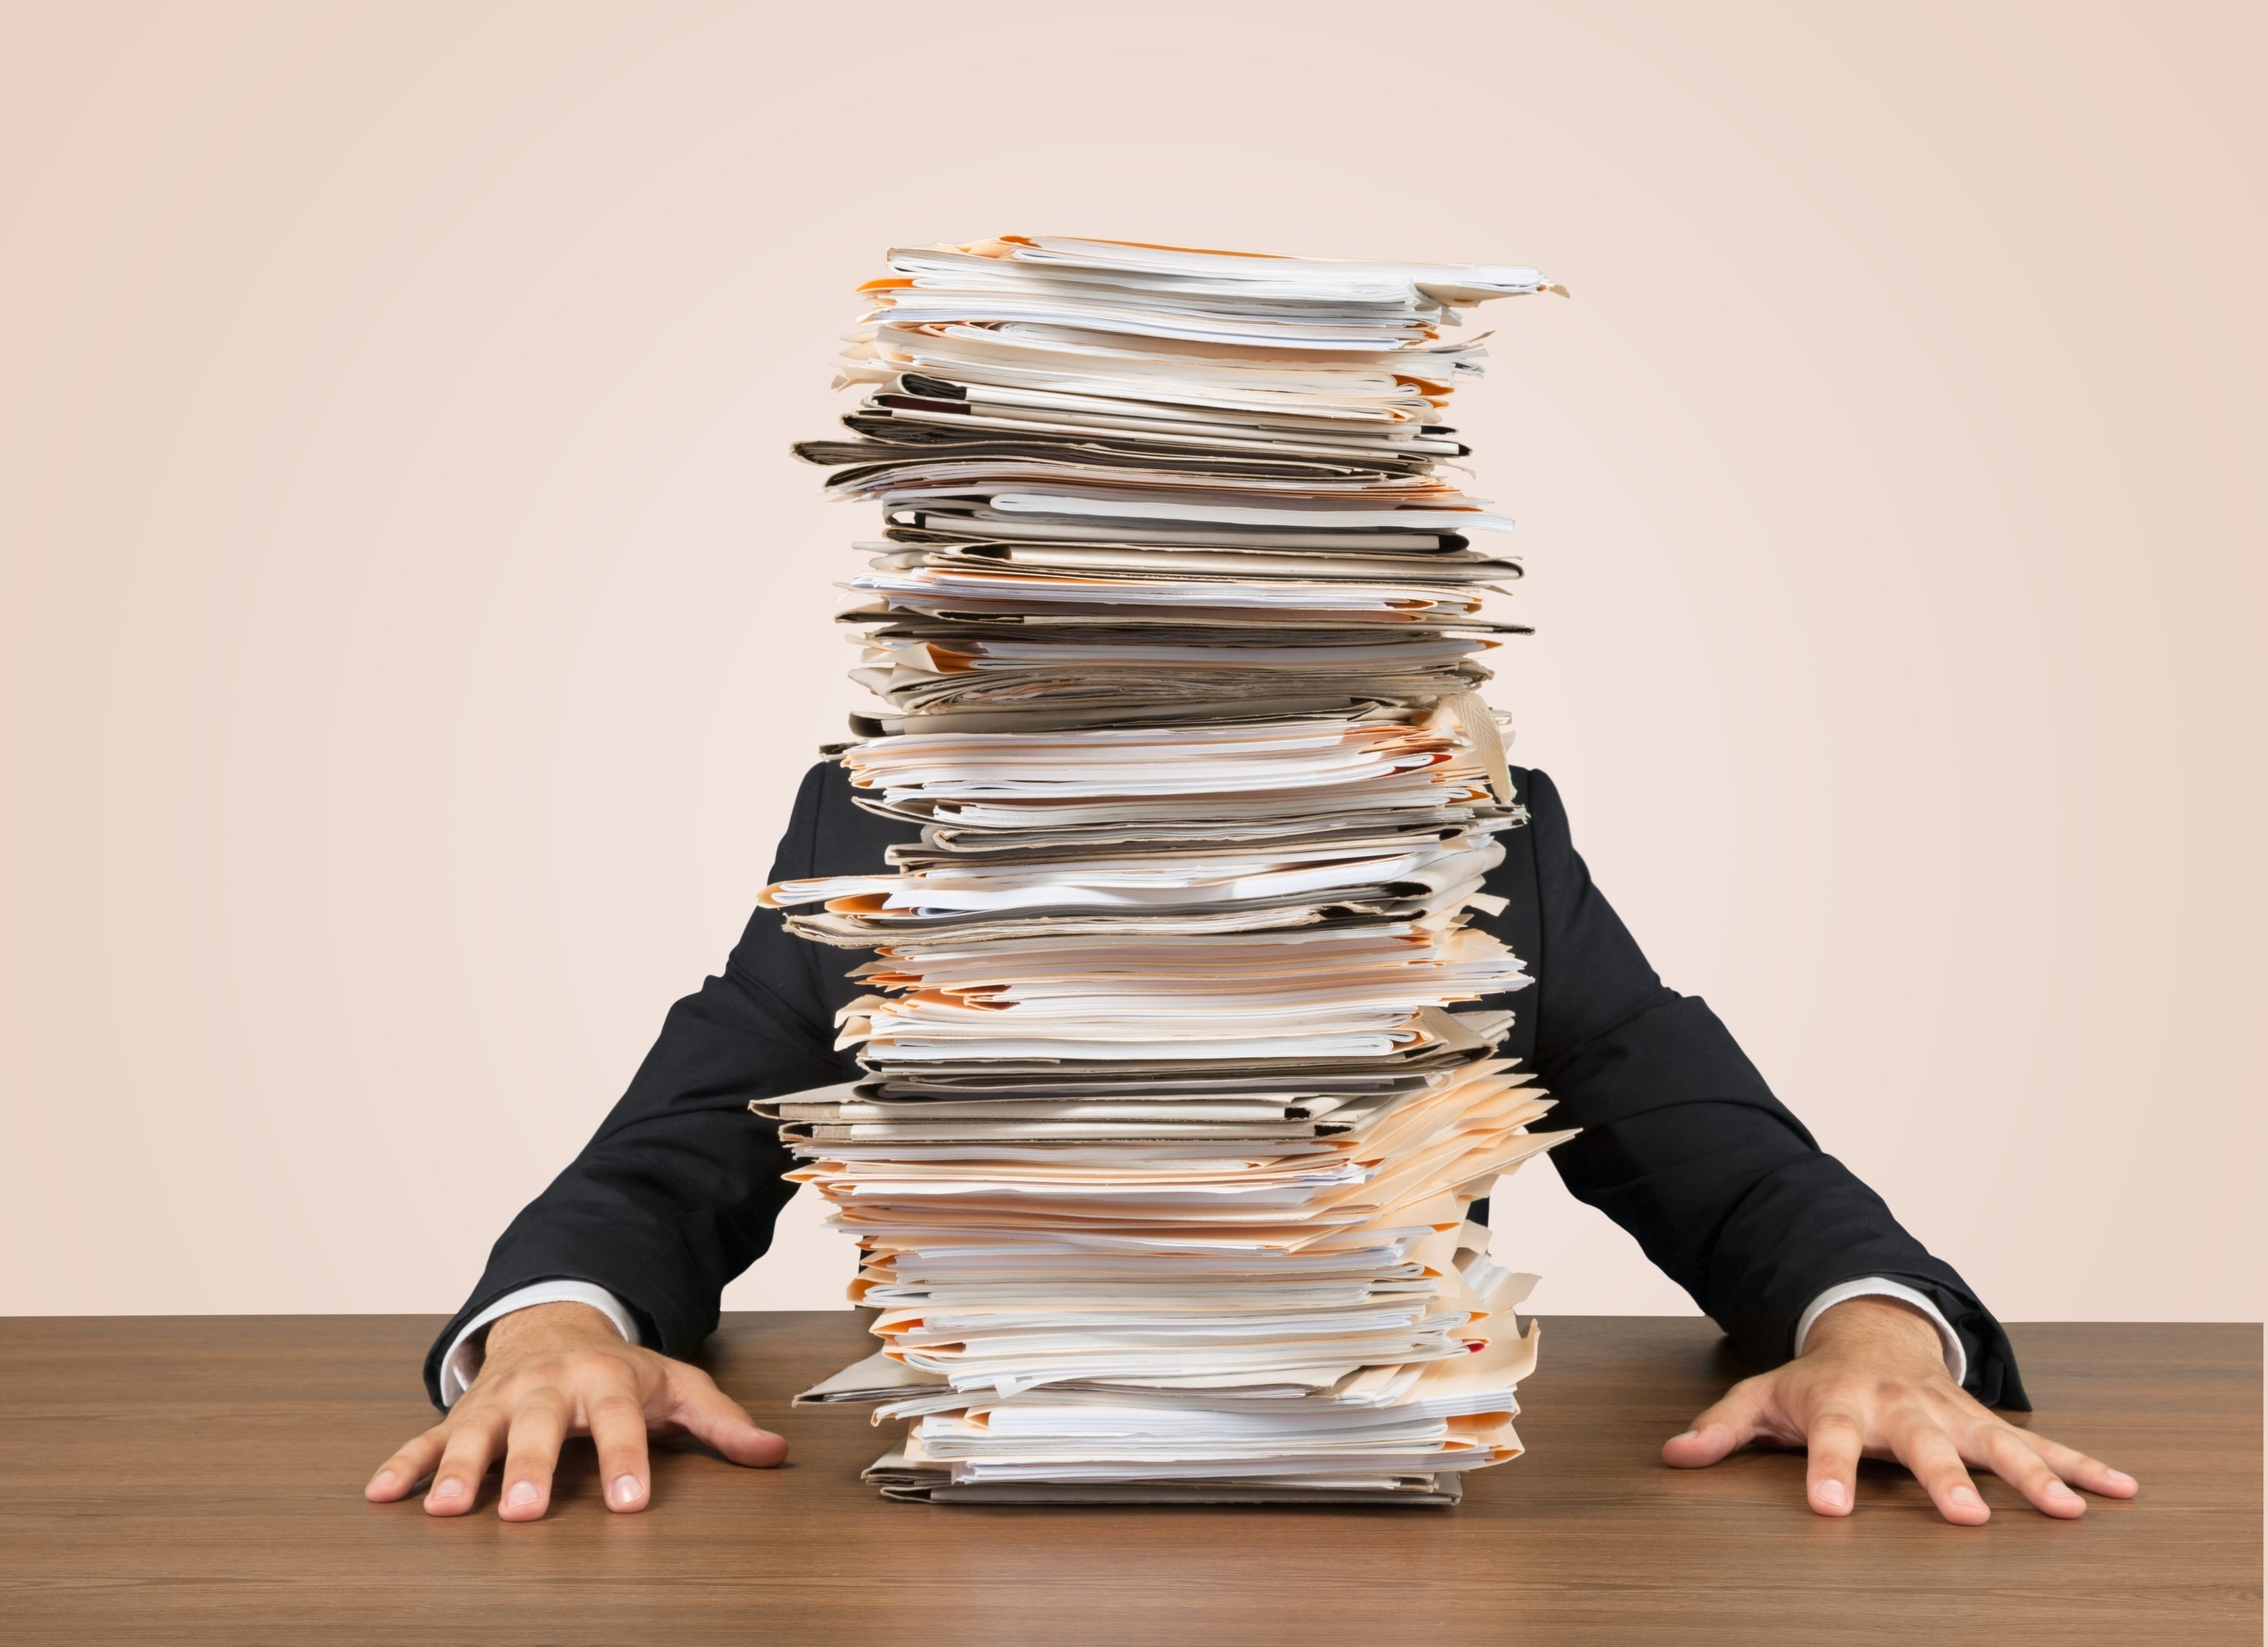  A person in a suit is sitting at a desk with a large stack of documents and paperwork piled high in front of them, symbolizing the search query 'Documents and paperwork for insurance claim'.